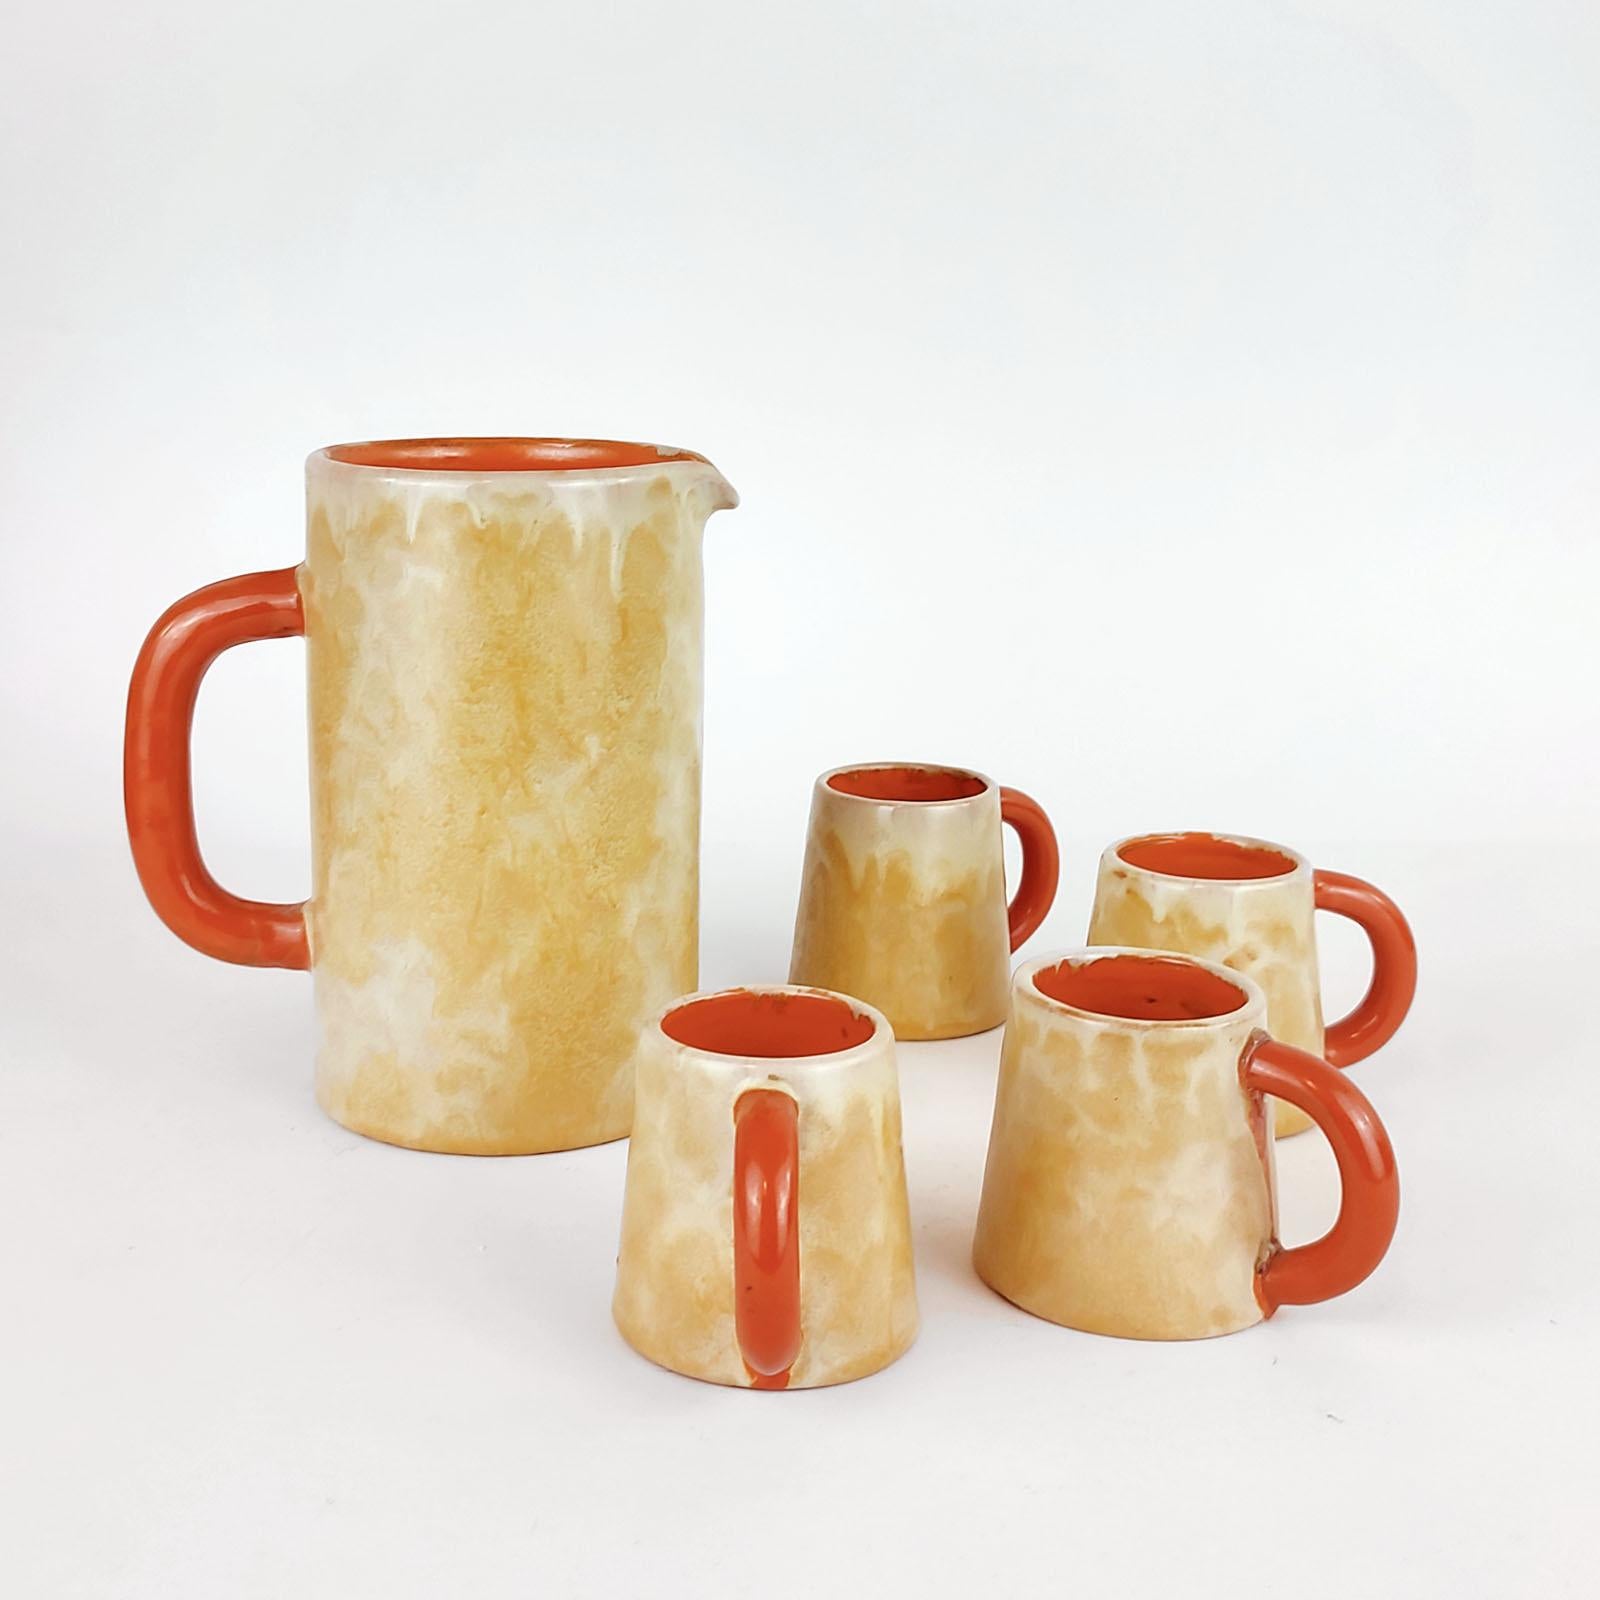 Mid-20th Century Ceramic Collection of Vessels, Anna-Lisa Thomson for Upsala-Ekeby, Sweden 1930s For Sale